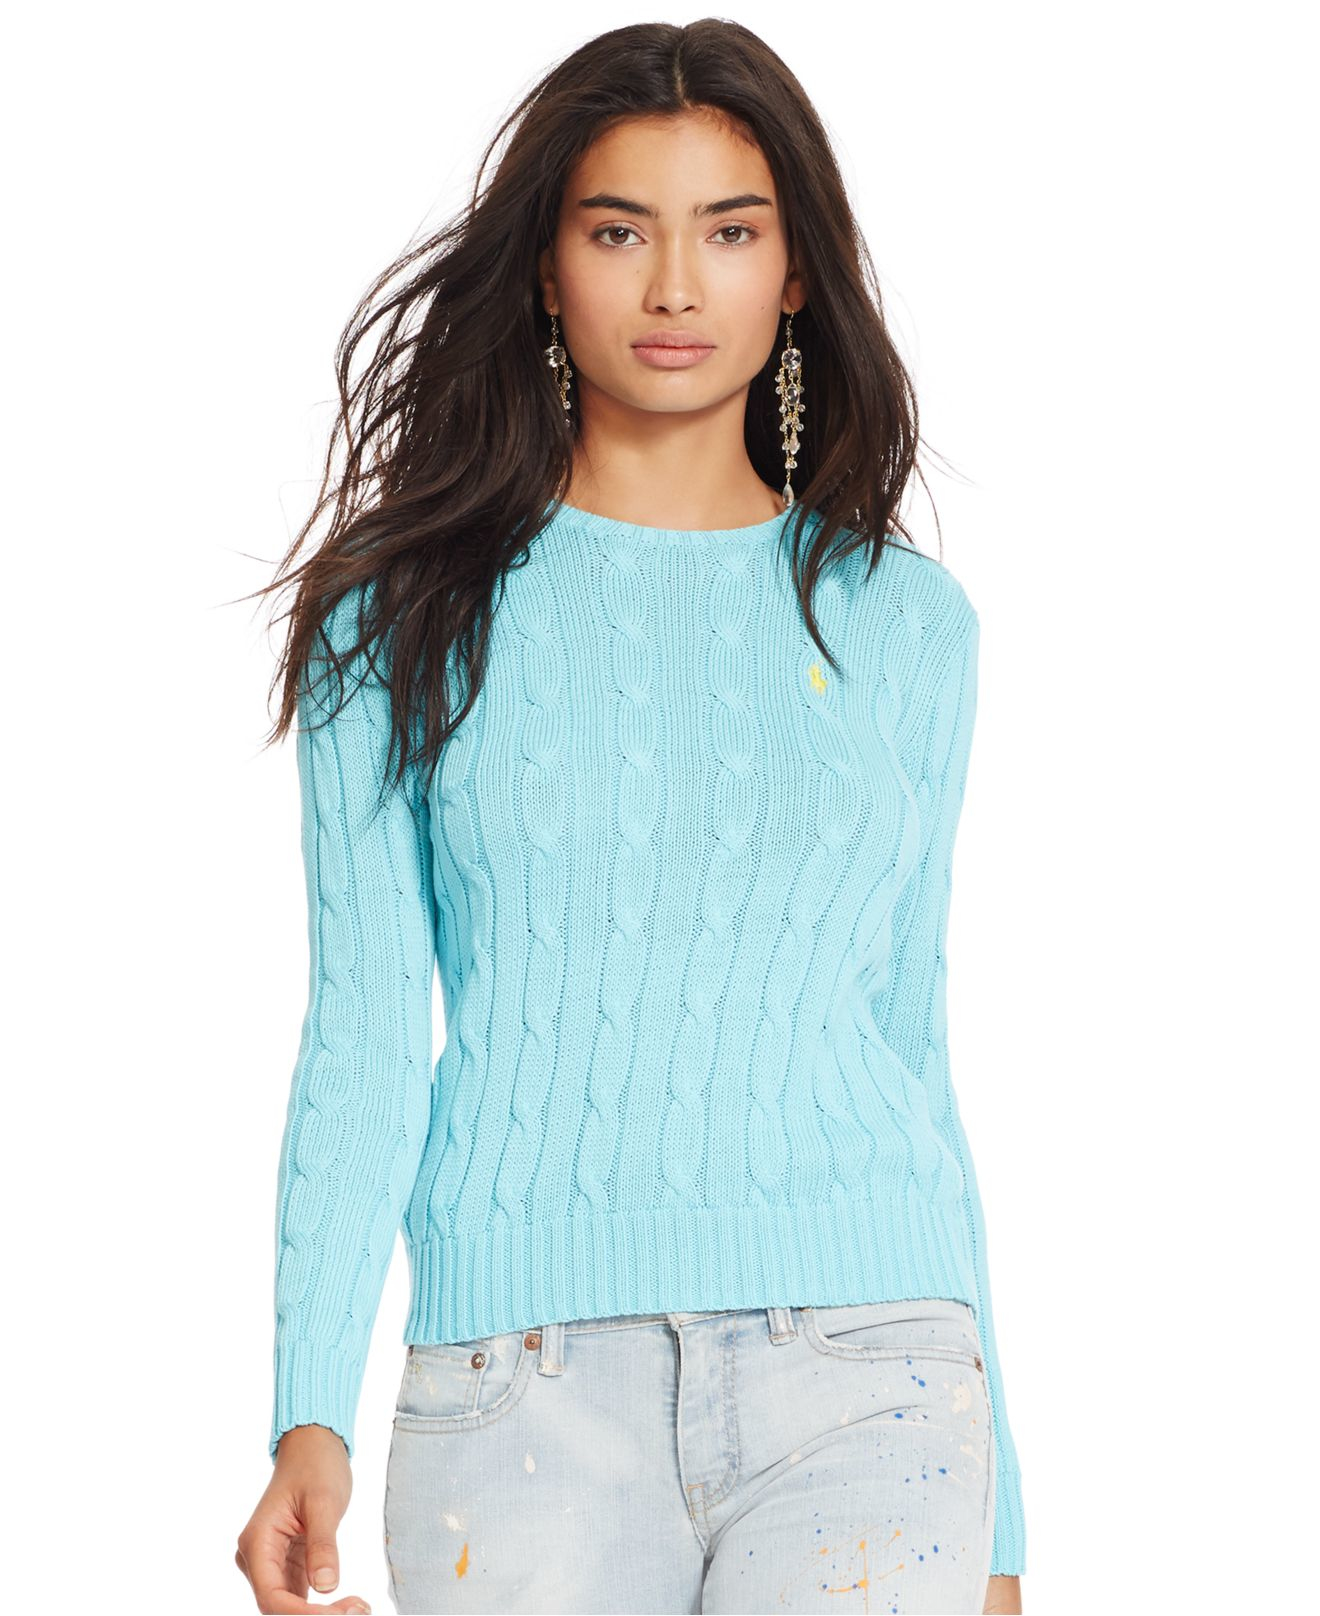 Lyst - Polo Ralph Lauren Cable-knit Crewneck Sweater in Blue